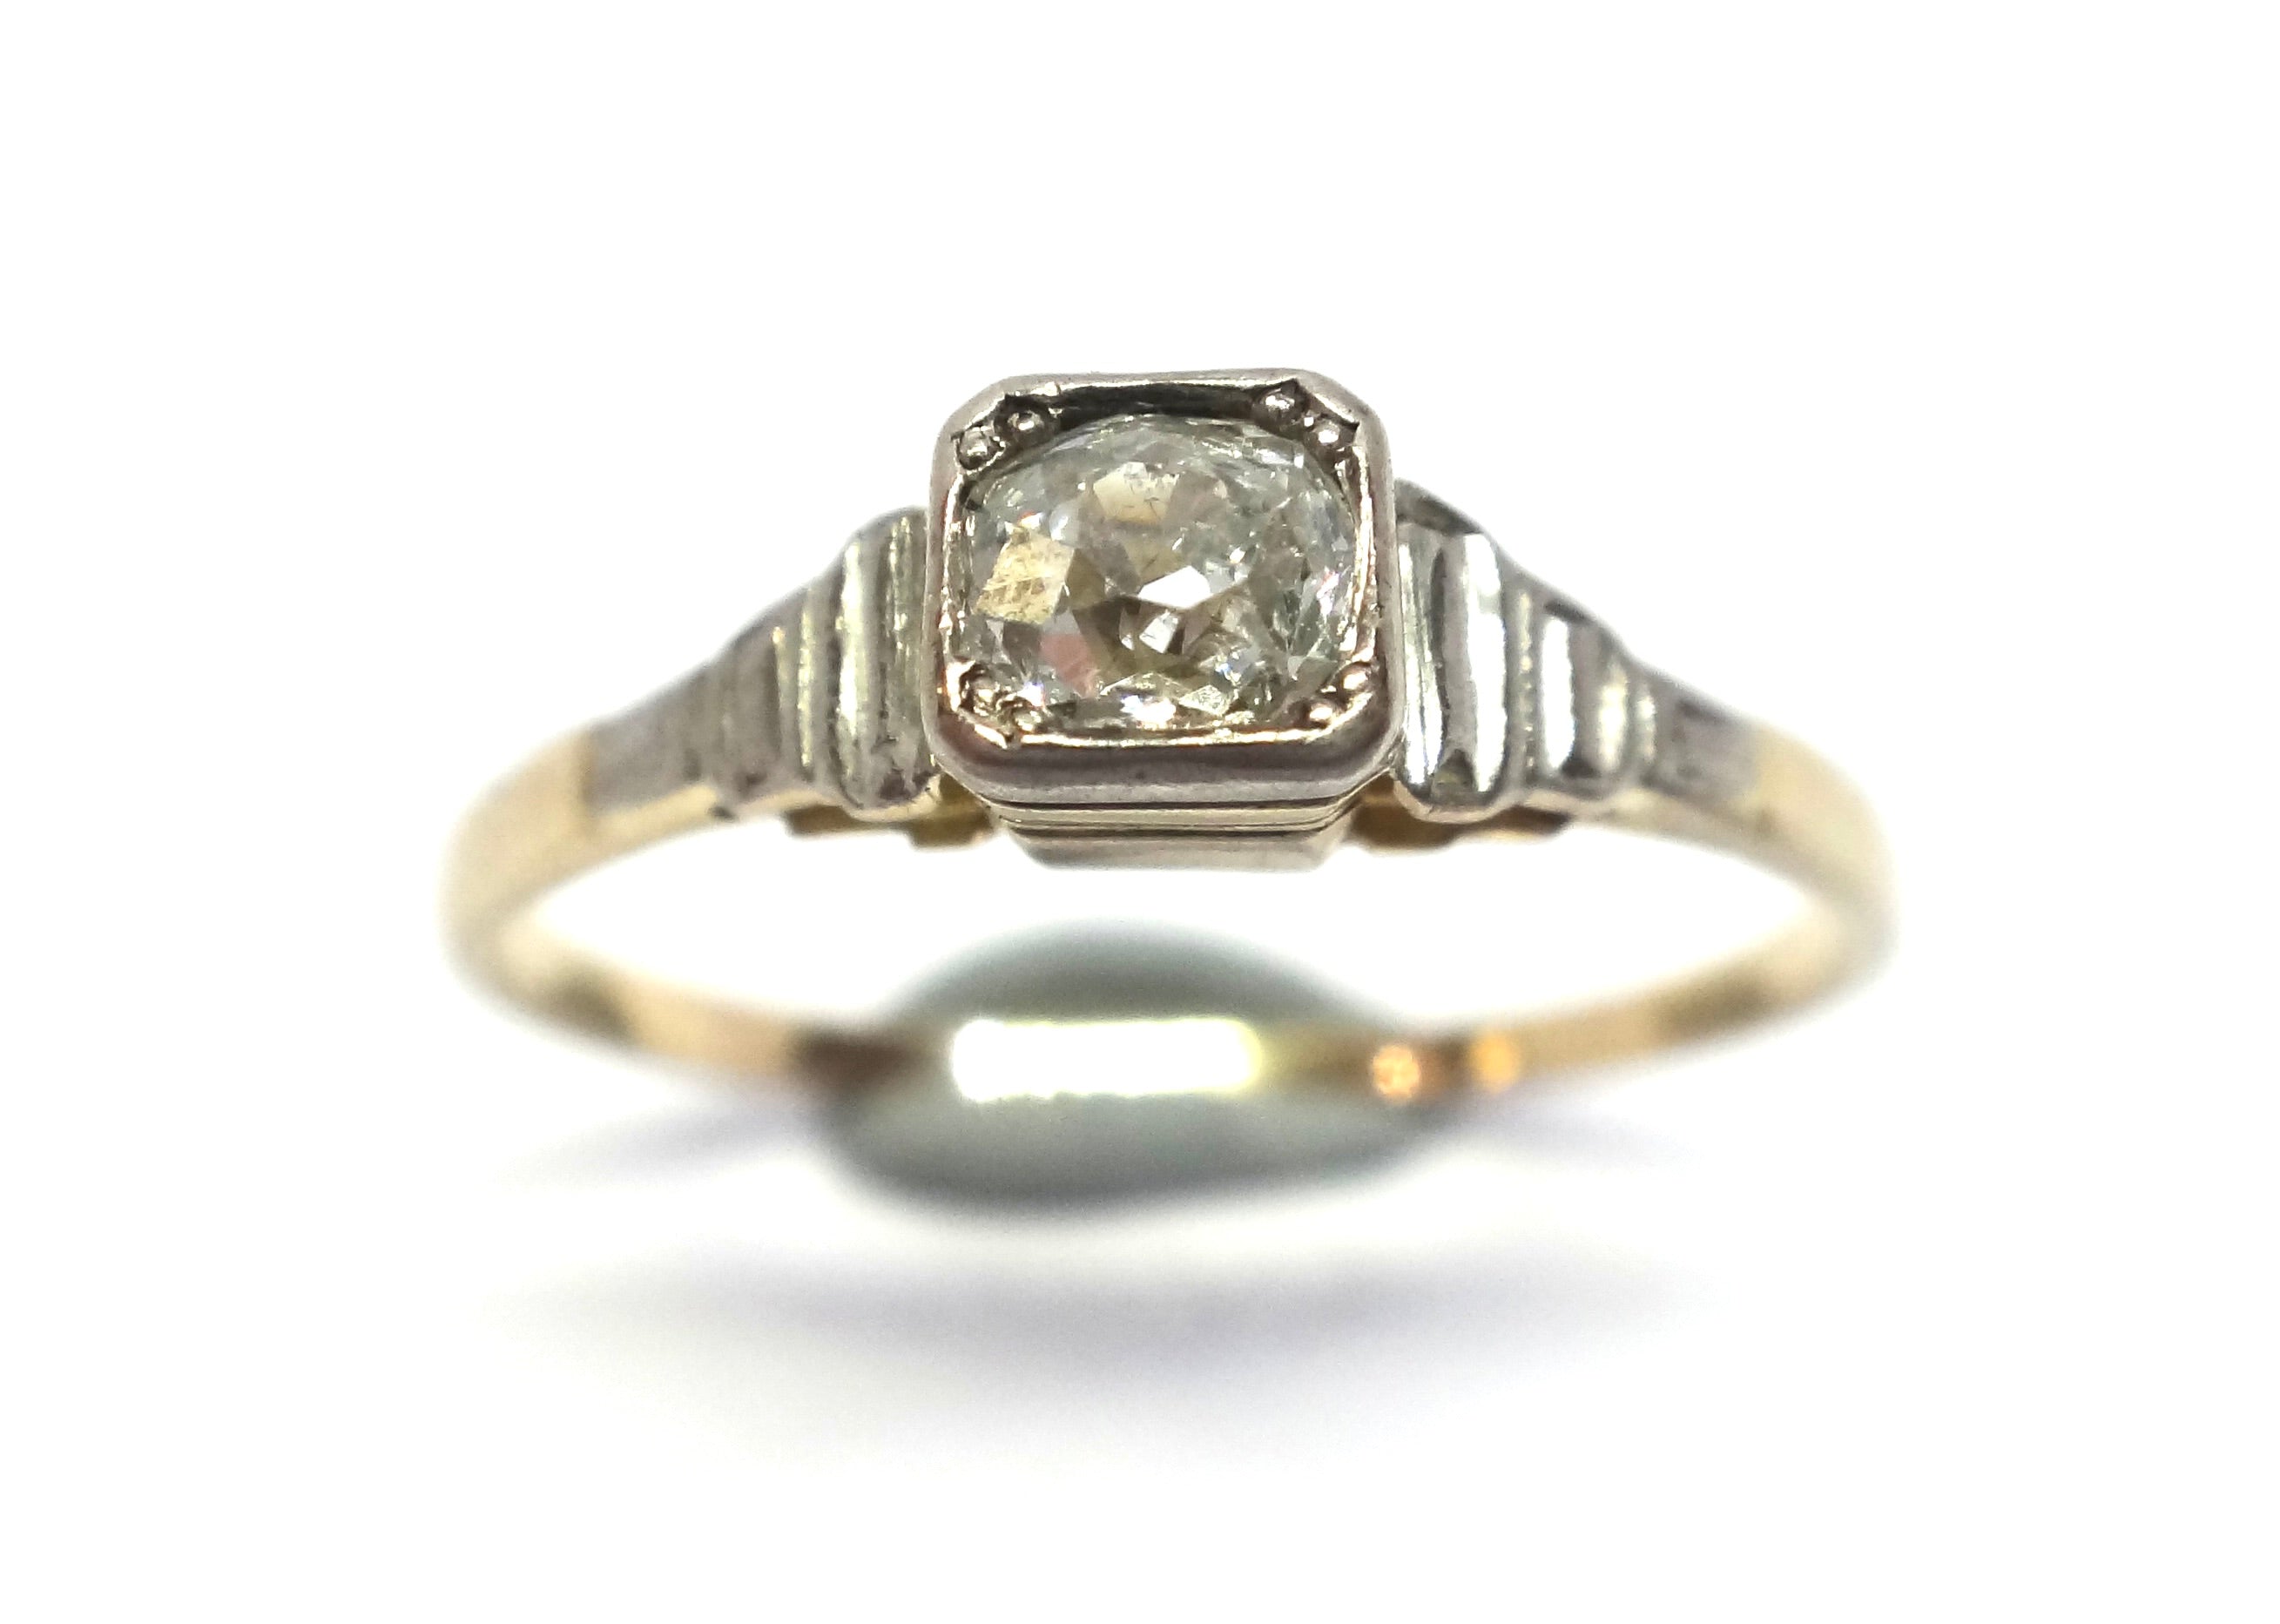 ANTIQUE 18ct Yellow Gold, Old Cut Diamond Ring